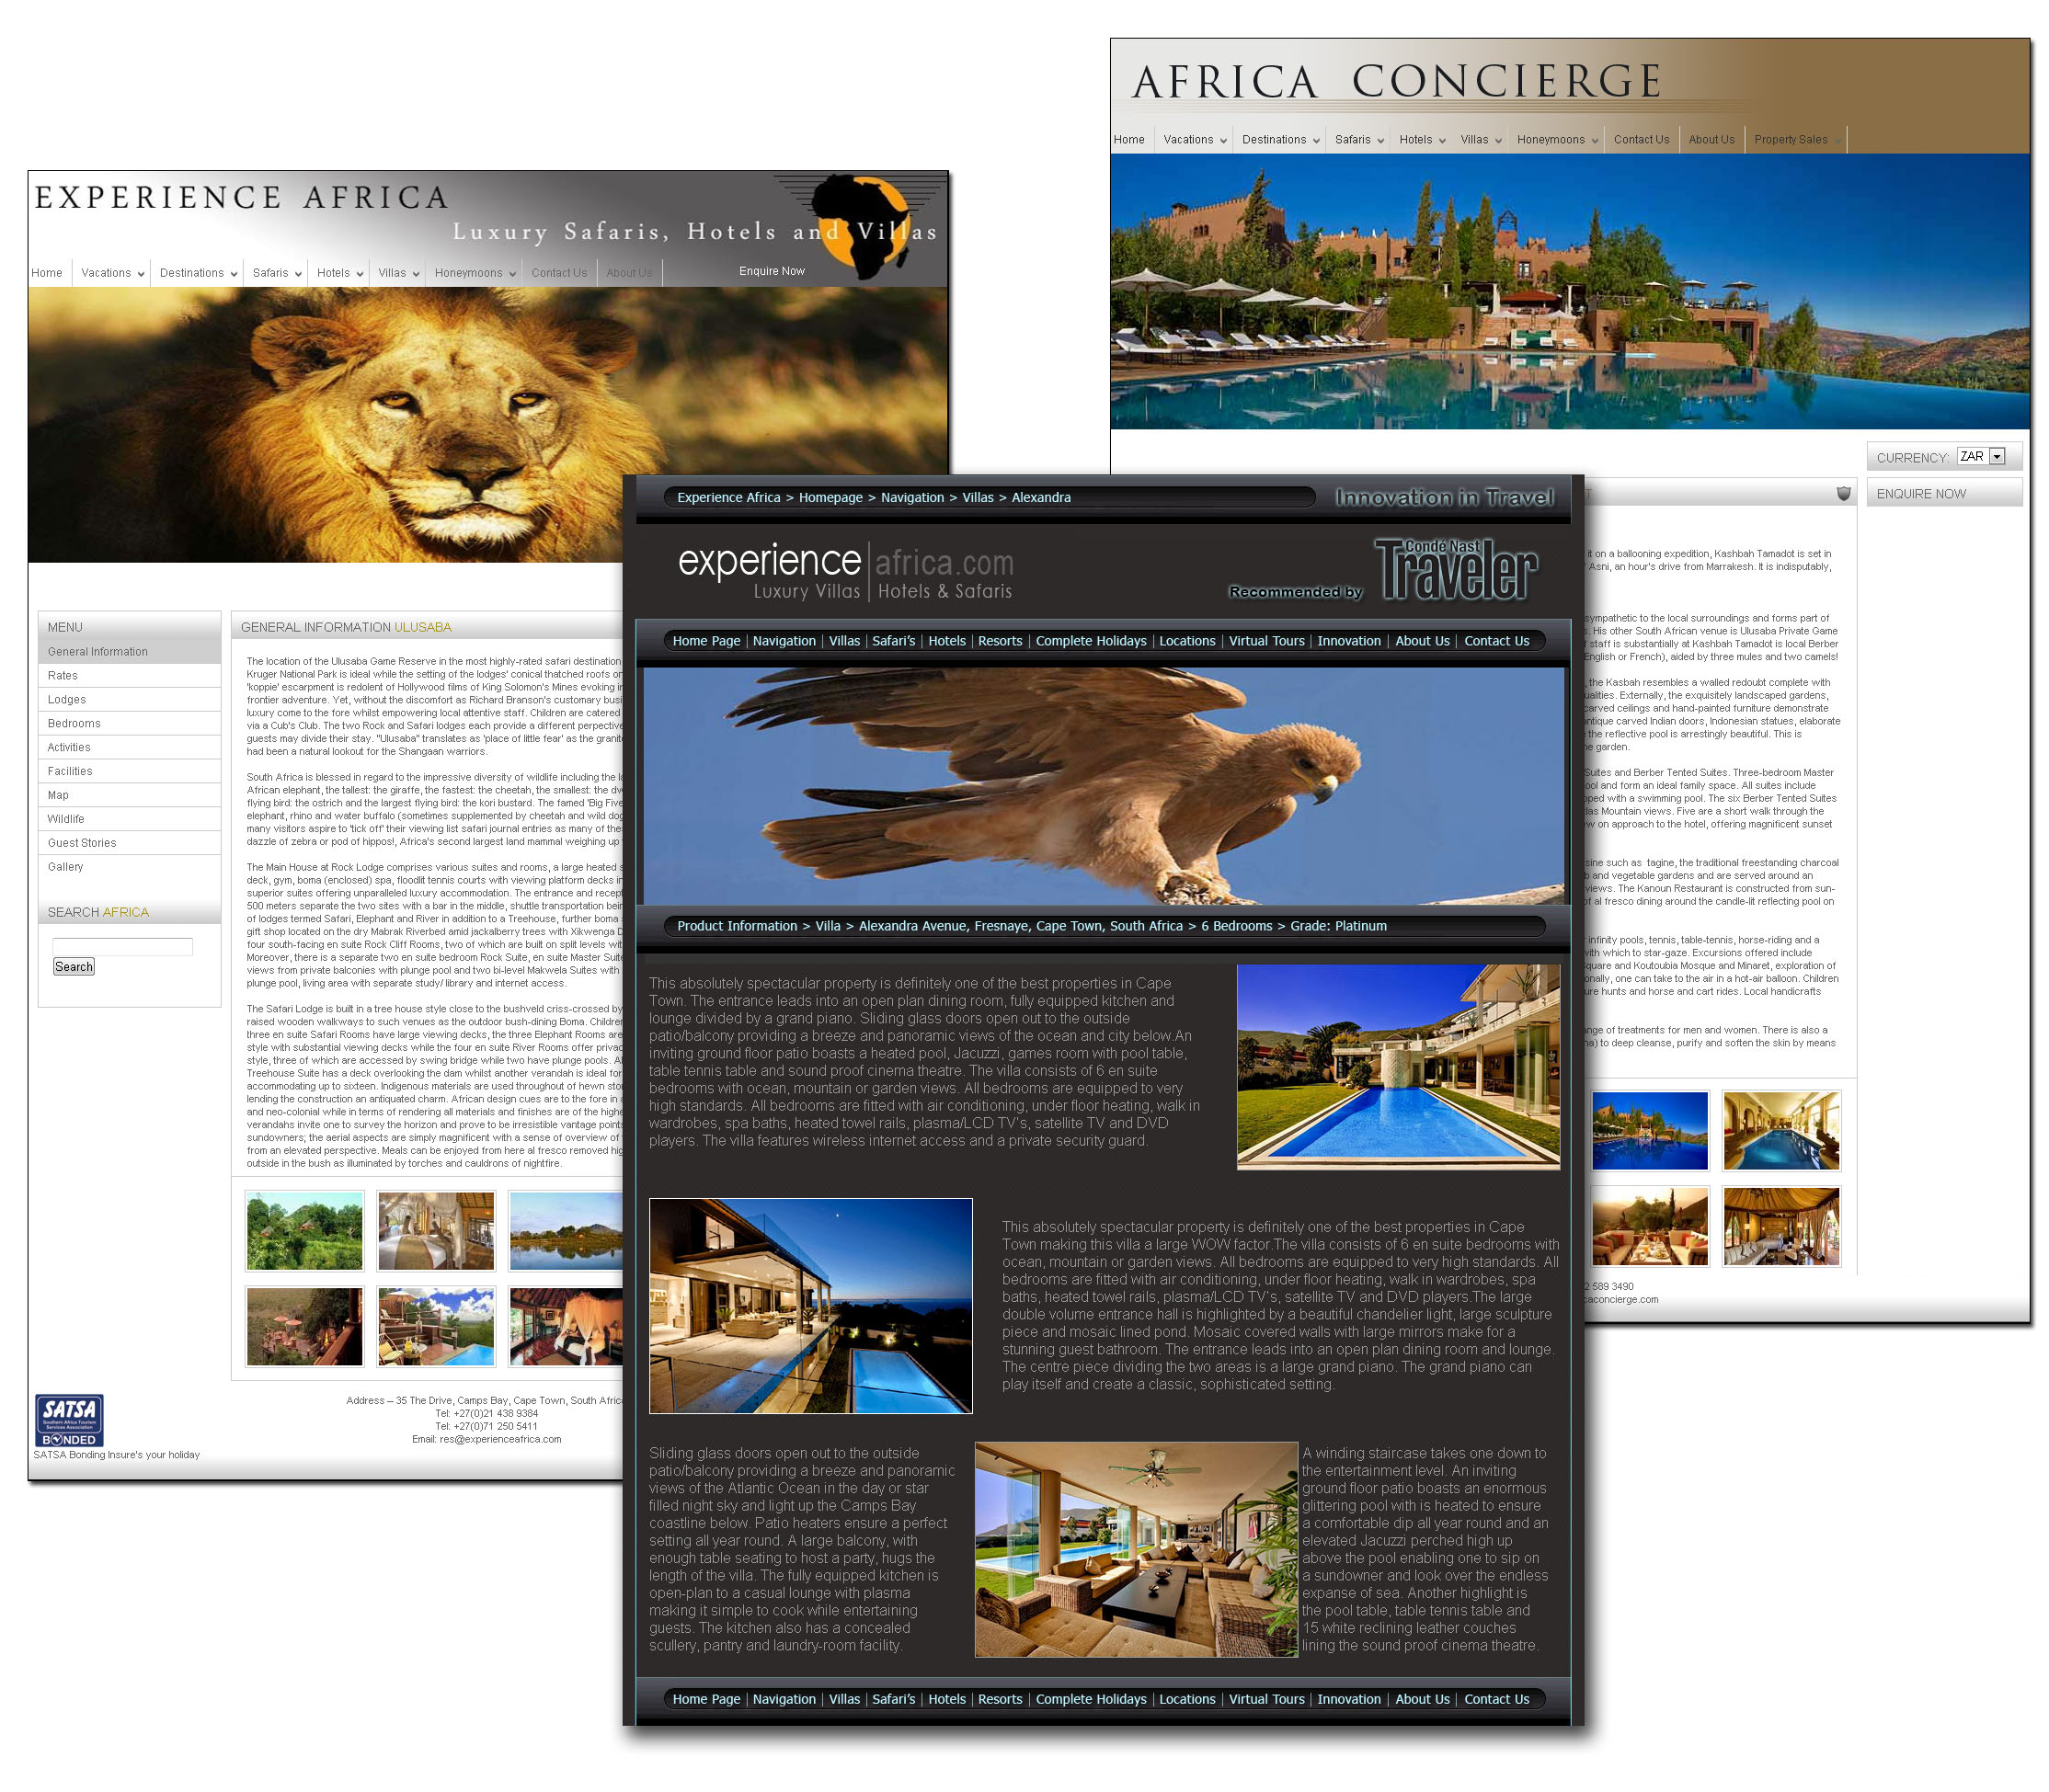 S-Web_2009-ExperiencAfrica.com_to_AfricanConcierge.com-for-Sotheby's_International_Realty